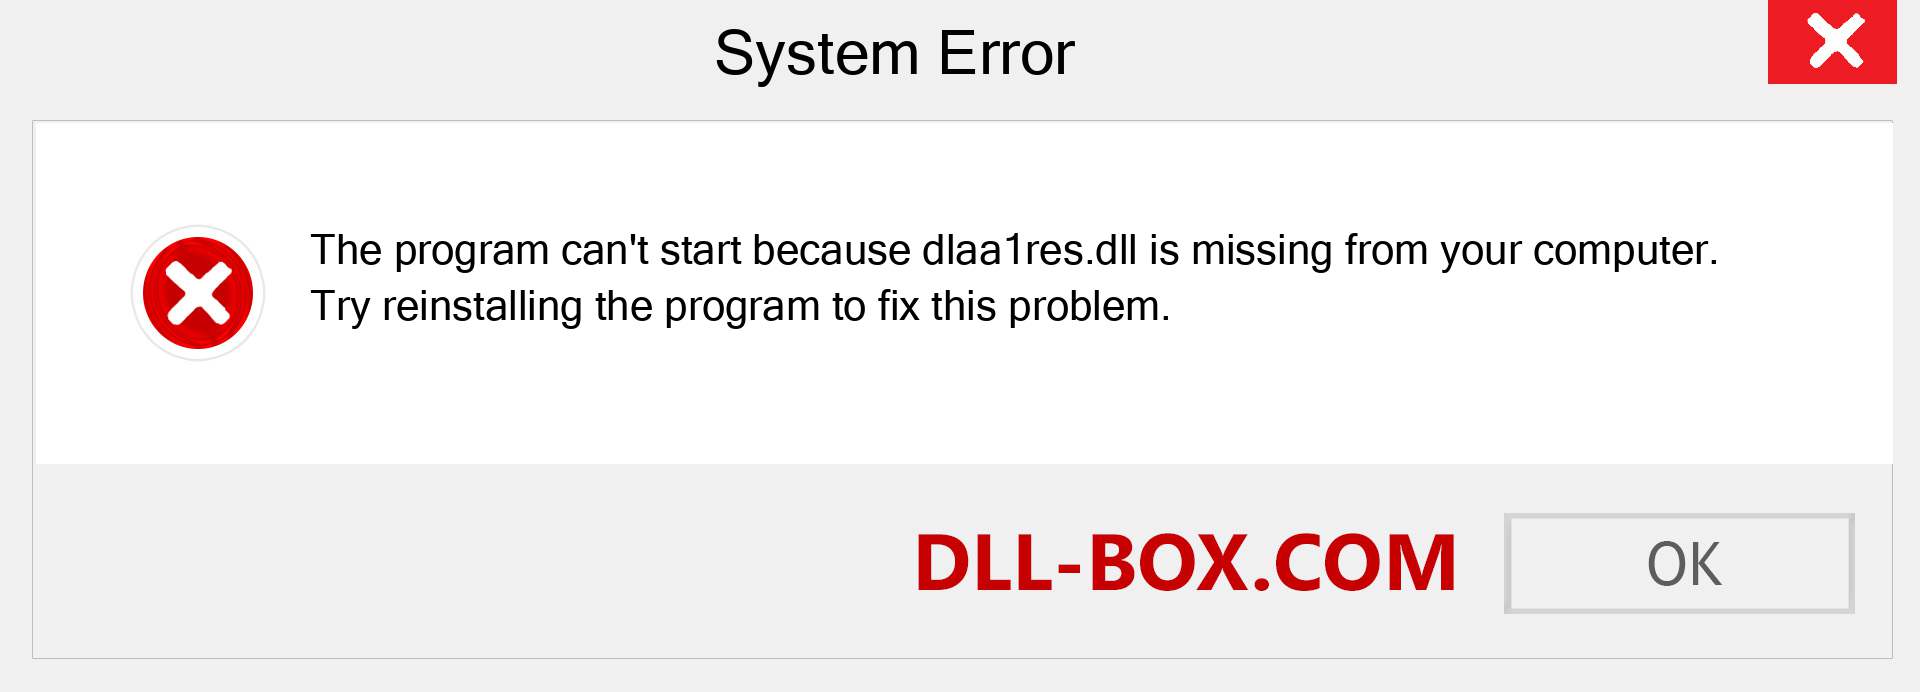  dlaa1res.dll file is missing?. Download for Windows 7, 8, 10 - Fix  dlaa1res dll Missing Error on Windows, photos, images